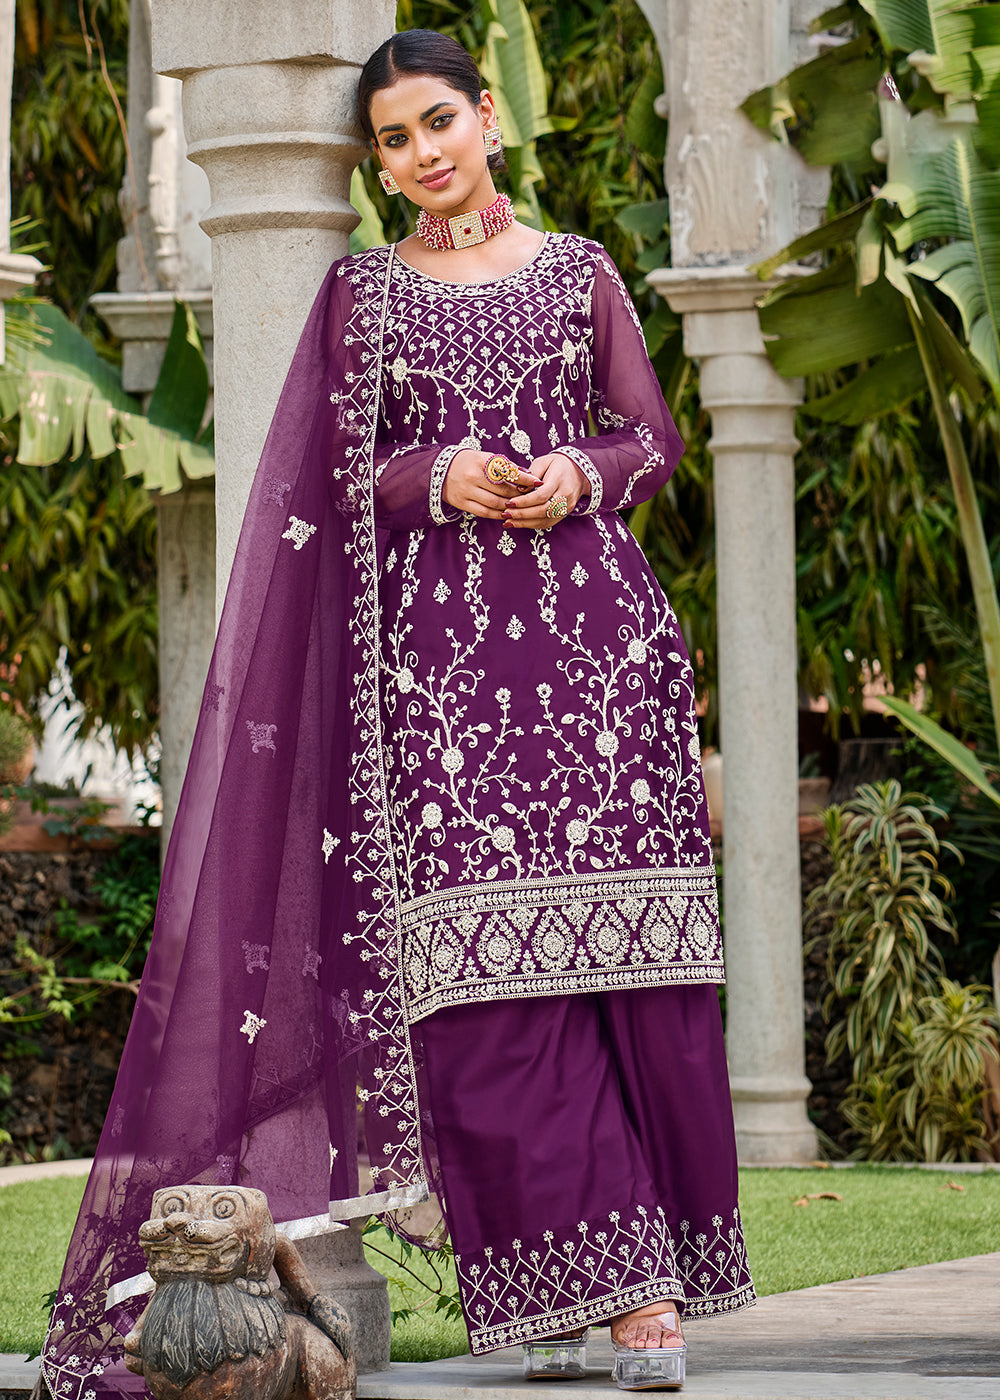 Buy Now Violet Purple Stone & Cording Work Festive Palazzo Suit Online in USA, UK, Canada, Germany, Australia & Worldwide at Empress Clothing. 